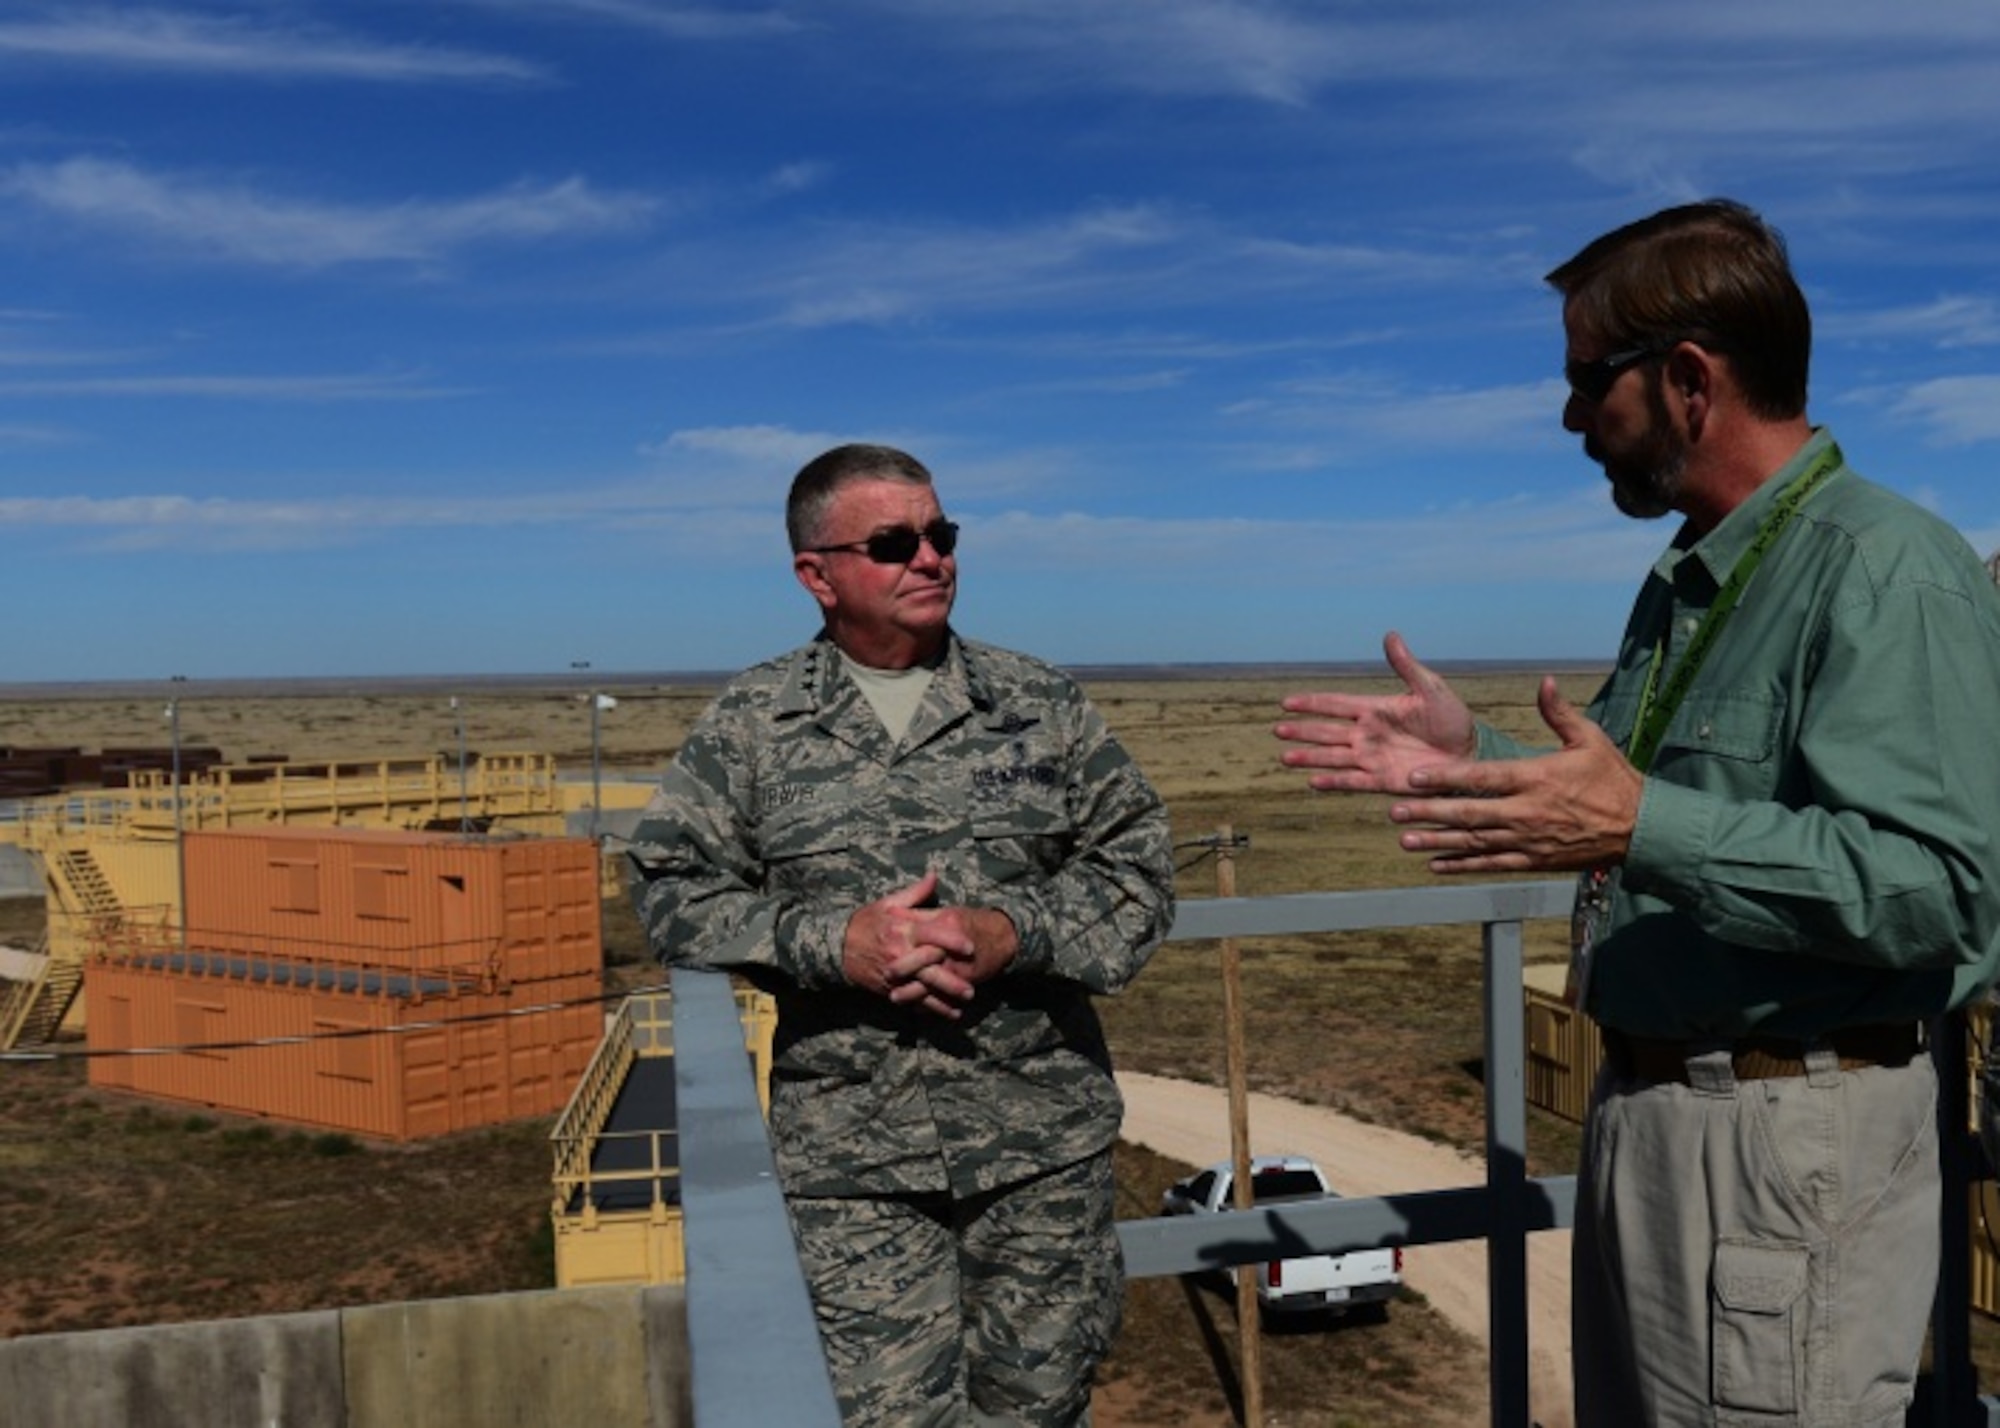 Steven Coffin, Melrose Air Force Range manager, briefs Lt. Gen. Thomas Travis, Surgeon General of the Air Force, on the assets that allow special operators from across the Department of Defense to practice Military Operations on Urban Terrain Oct. 28, 2014, at Melrose Air Force Range, N.M. This MOUT site provided a simulated urban combat environment to Cannon medics competing in the Commando Challenge during September's Emergency Medical Technicians rodeo. (U.S. Air Force Photo/Airman 1st Class Shelby Kay-Fantozzi)